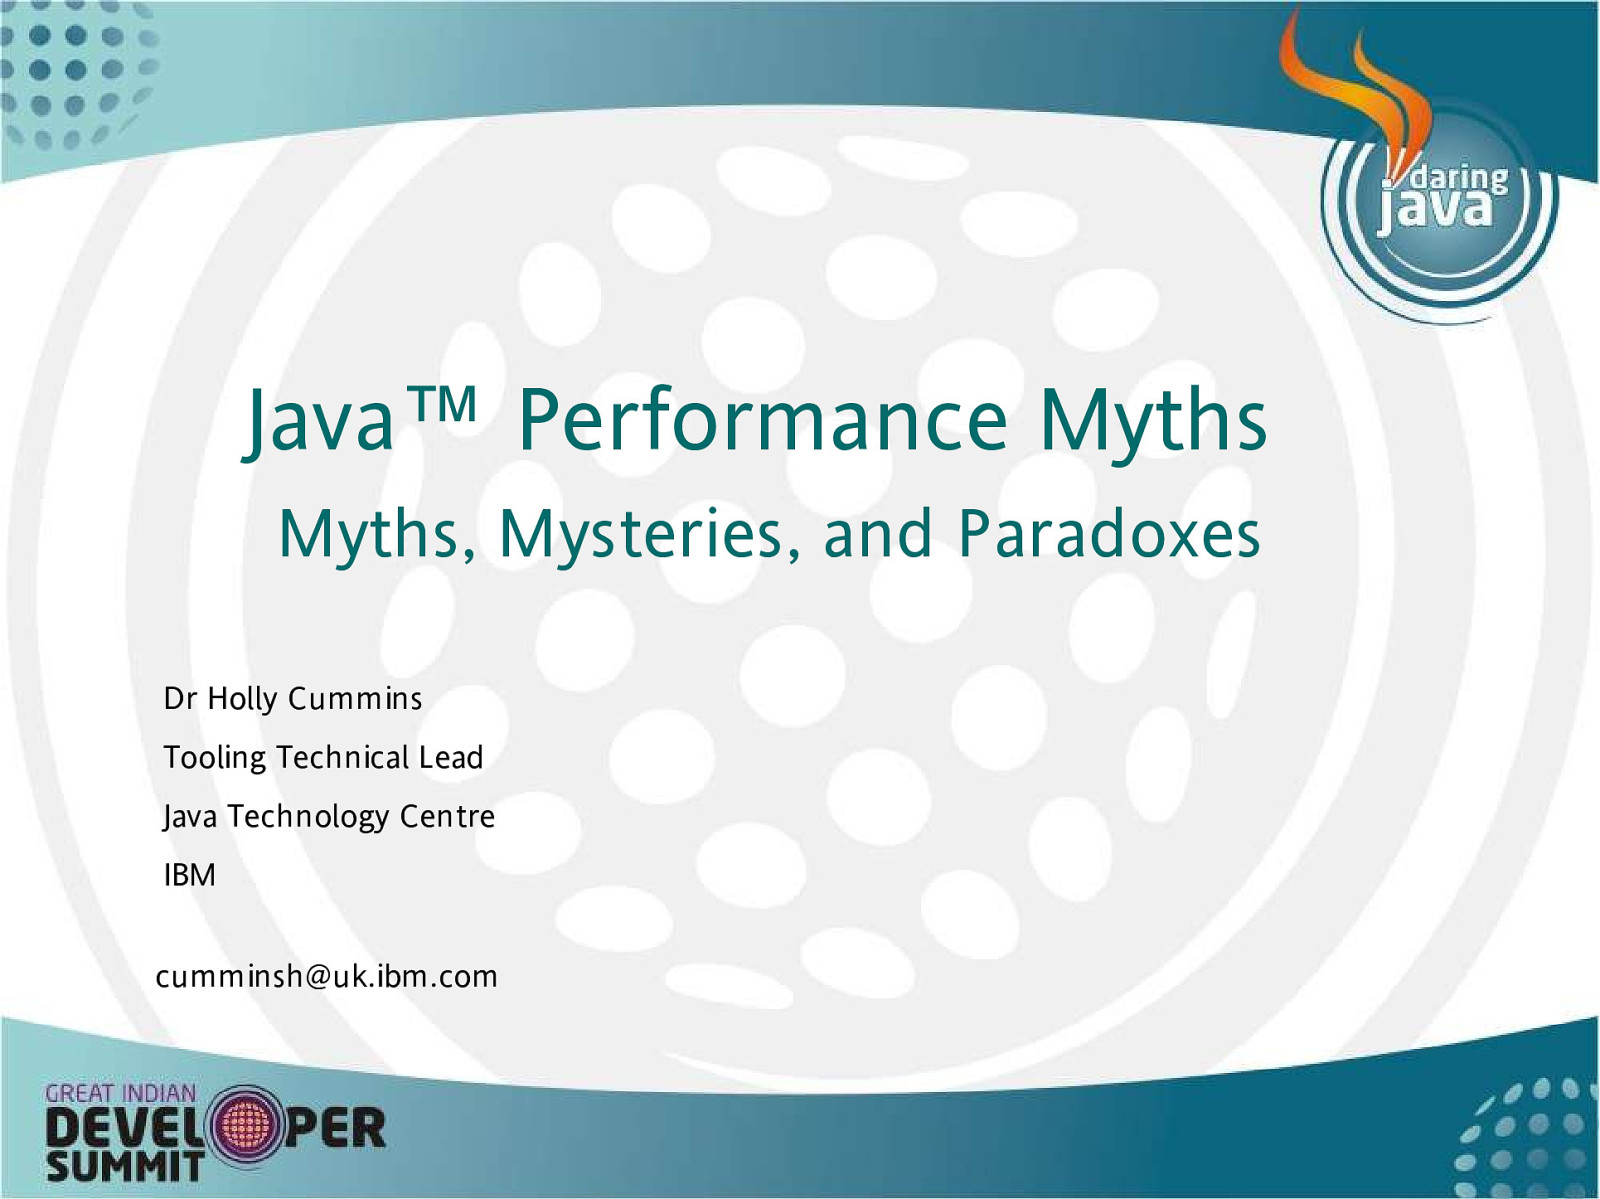 Java Performance - Myths, Mysteries, and Paradoxes